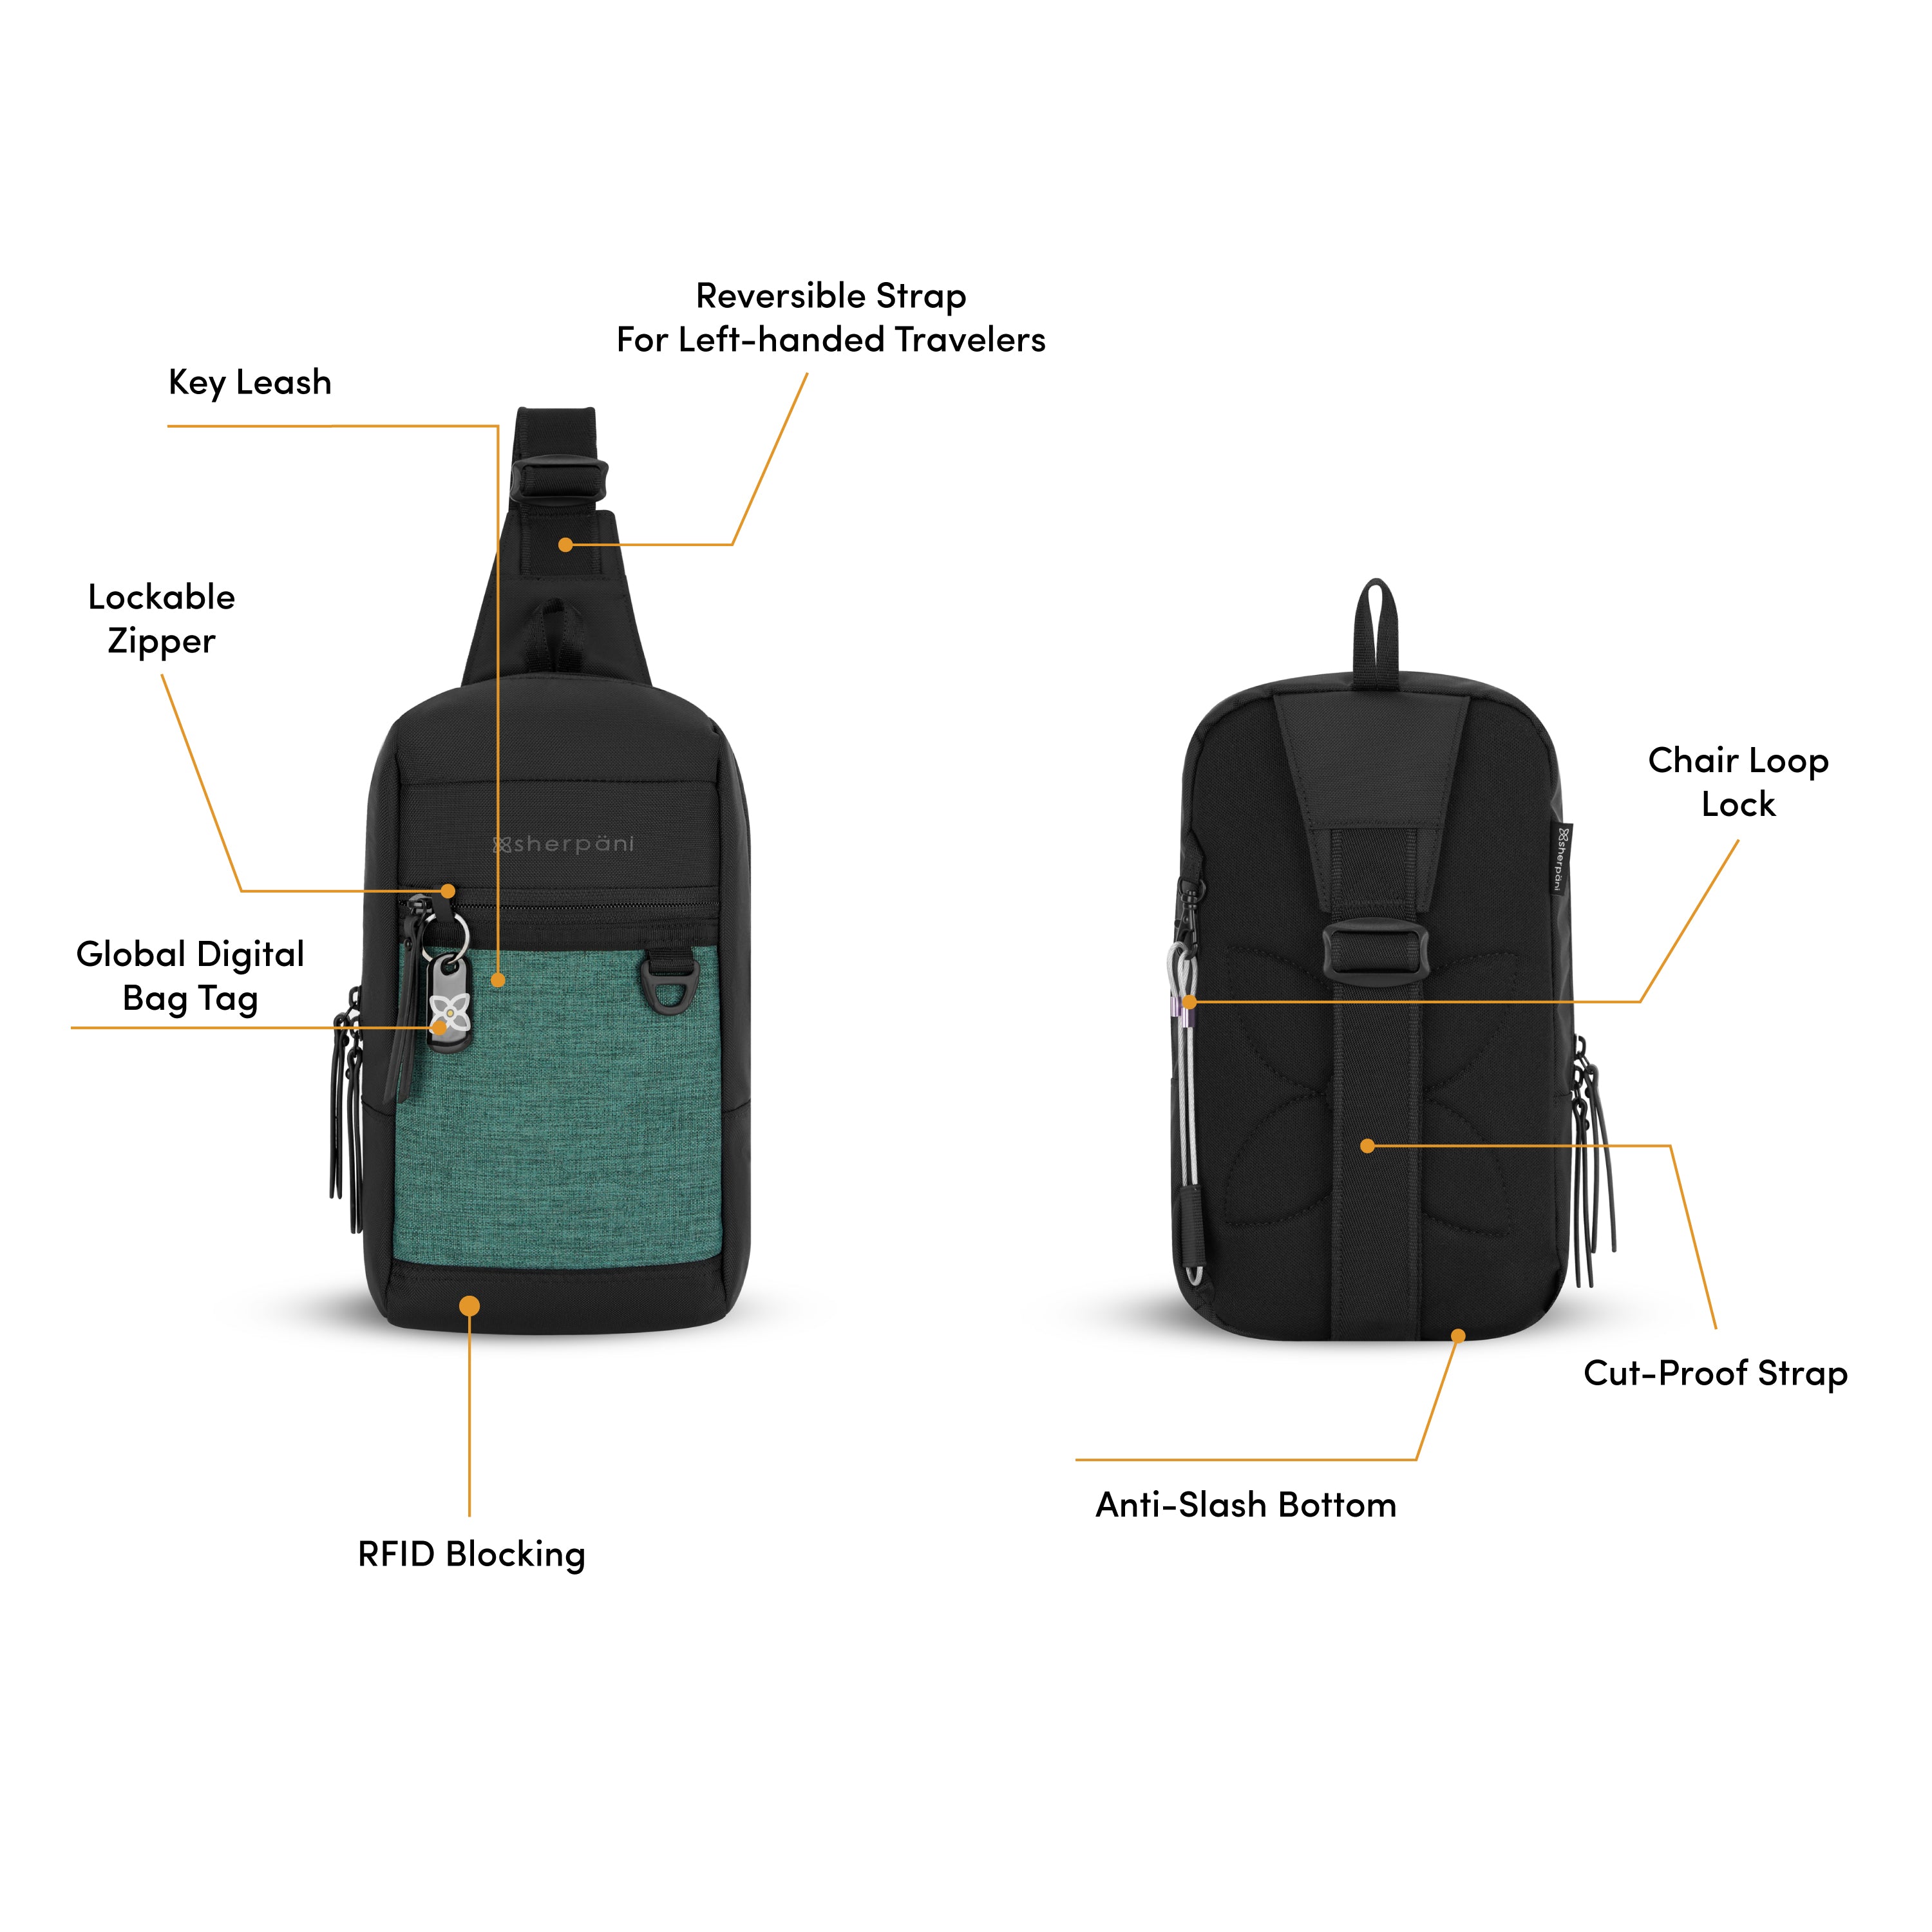 Graphic showing front and back view of the Sherpani Metro travel sling bag. Yellow circles highlight the following features: key leach clip, adjustable strap turns the Metro into a left-handed sling bag, locking zipper pocket, Global Digital Bag Tag, RFID protection, wire-loop chair lock, anti-slash strap, cut-proof fabric on bottom. 